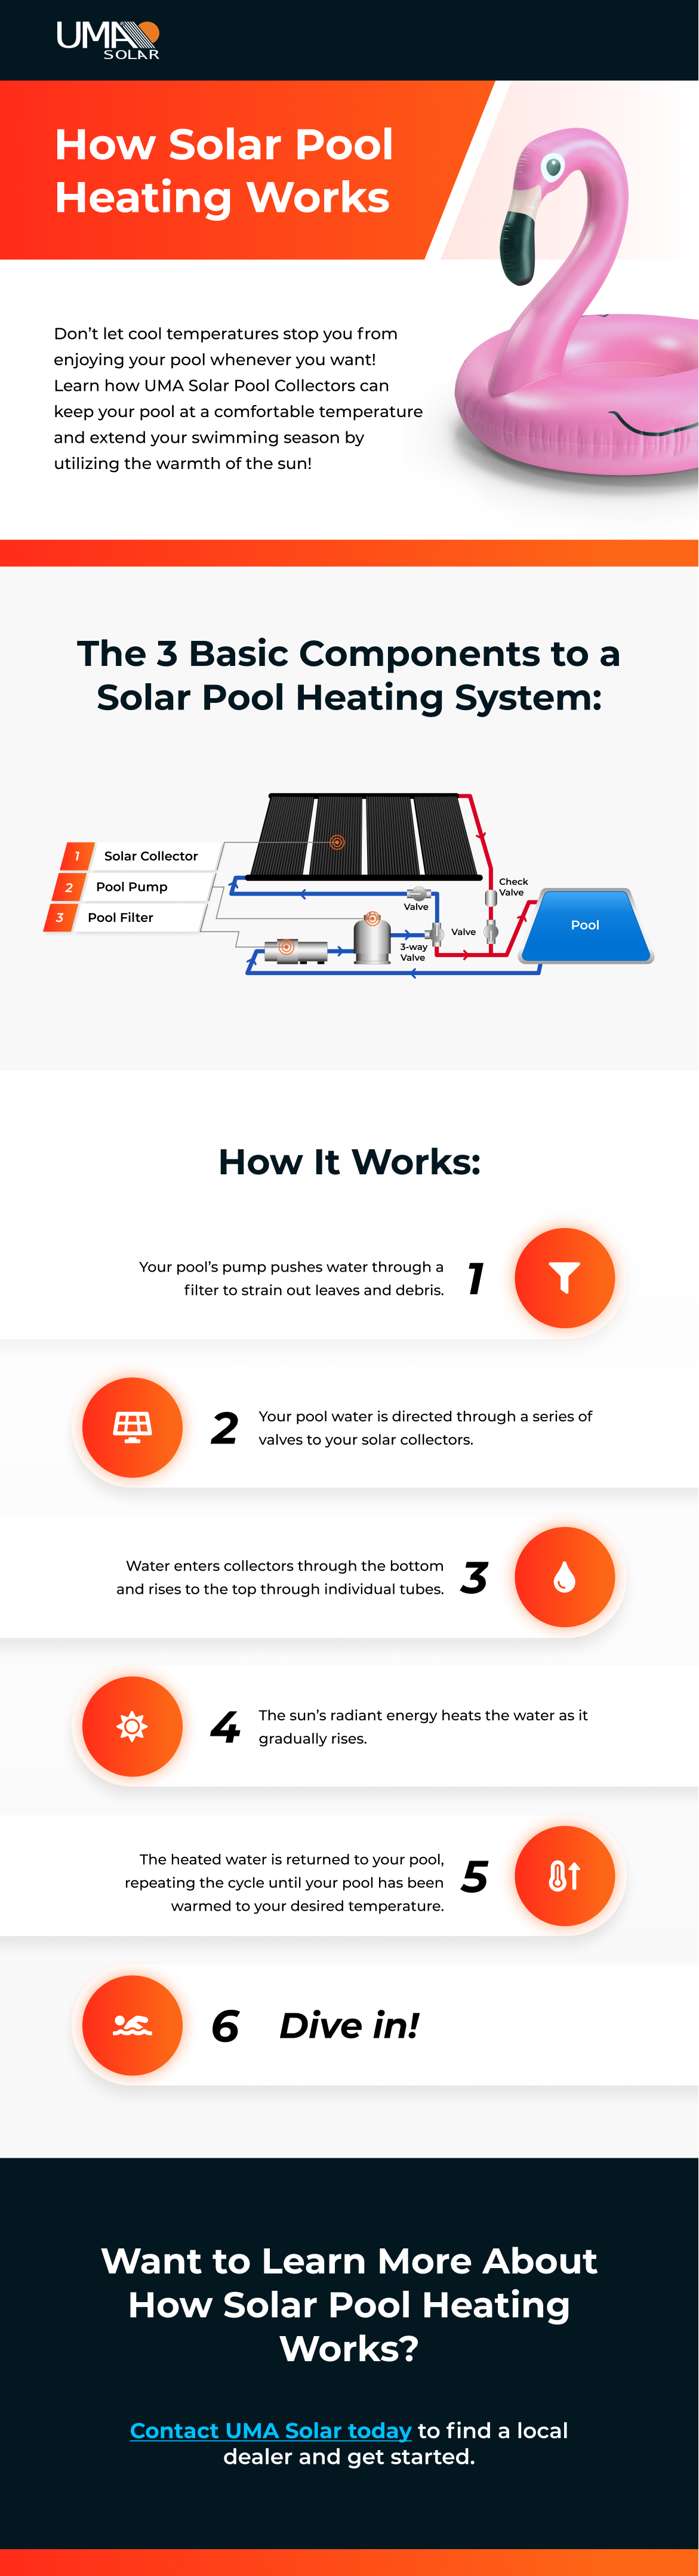 How Solar Pool Heating Systems Work In 6 Steps [Infographic] 2